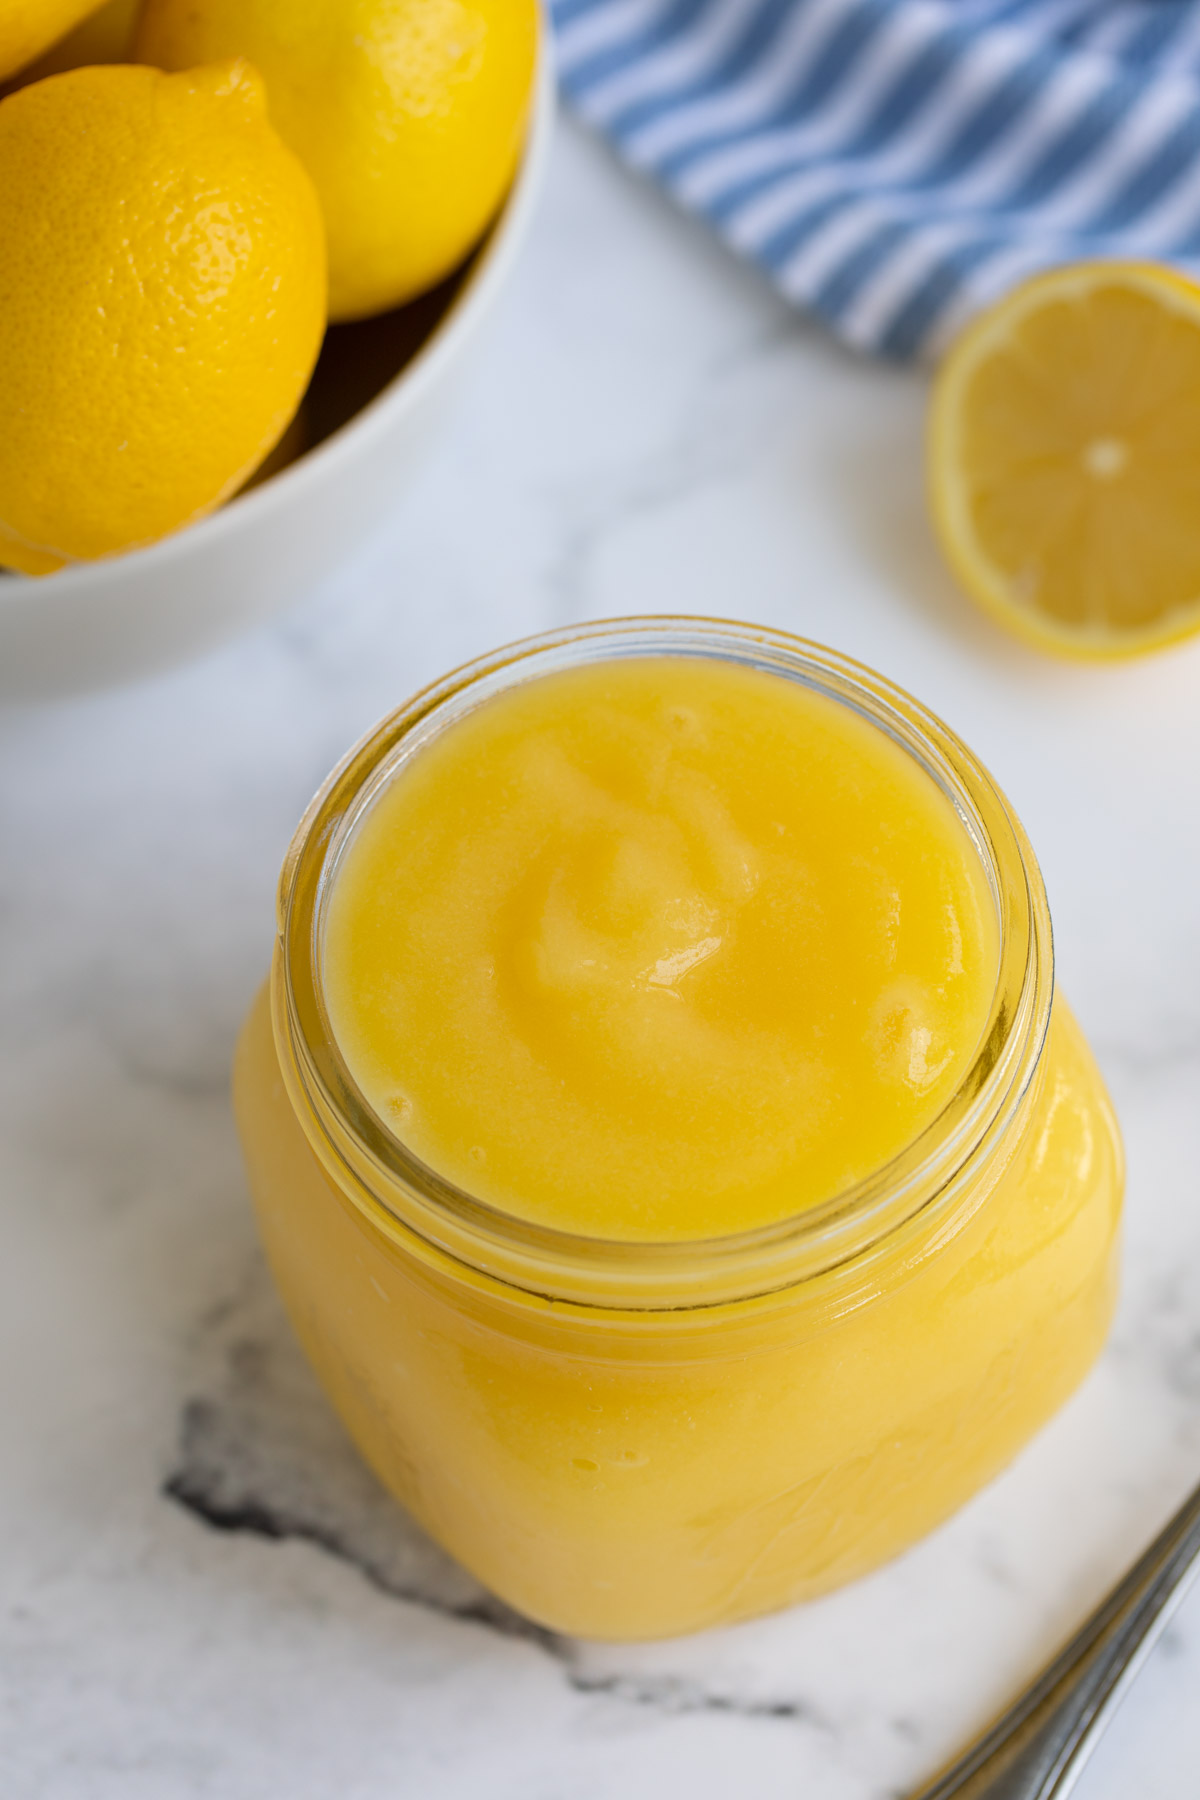 An open jar of microwave lemon curd on a white surface by a bowl of lemons.